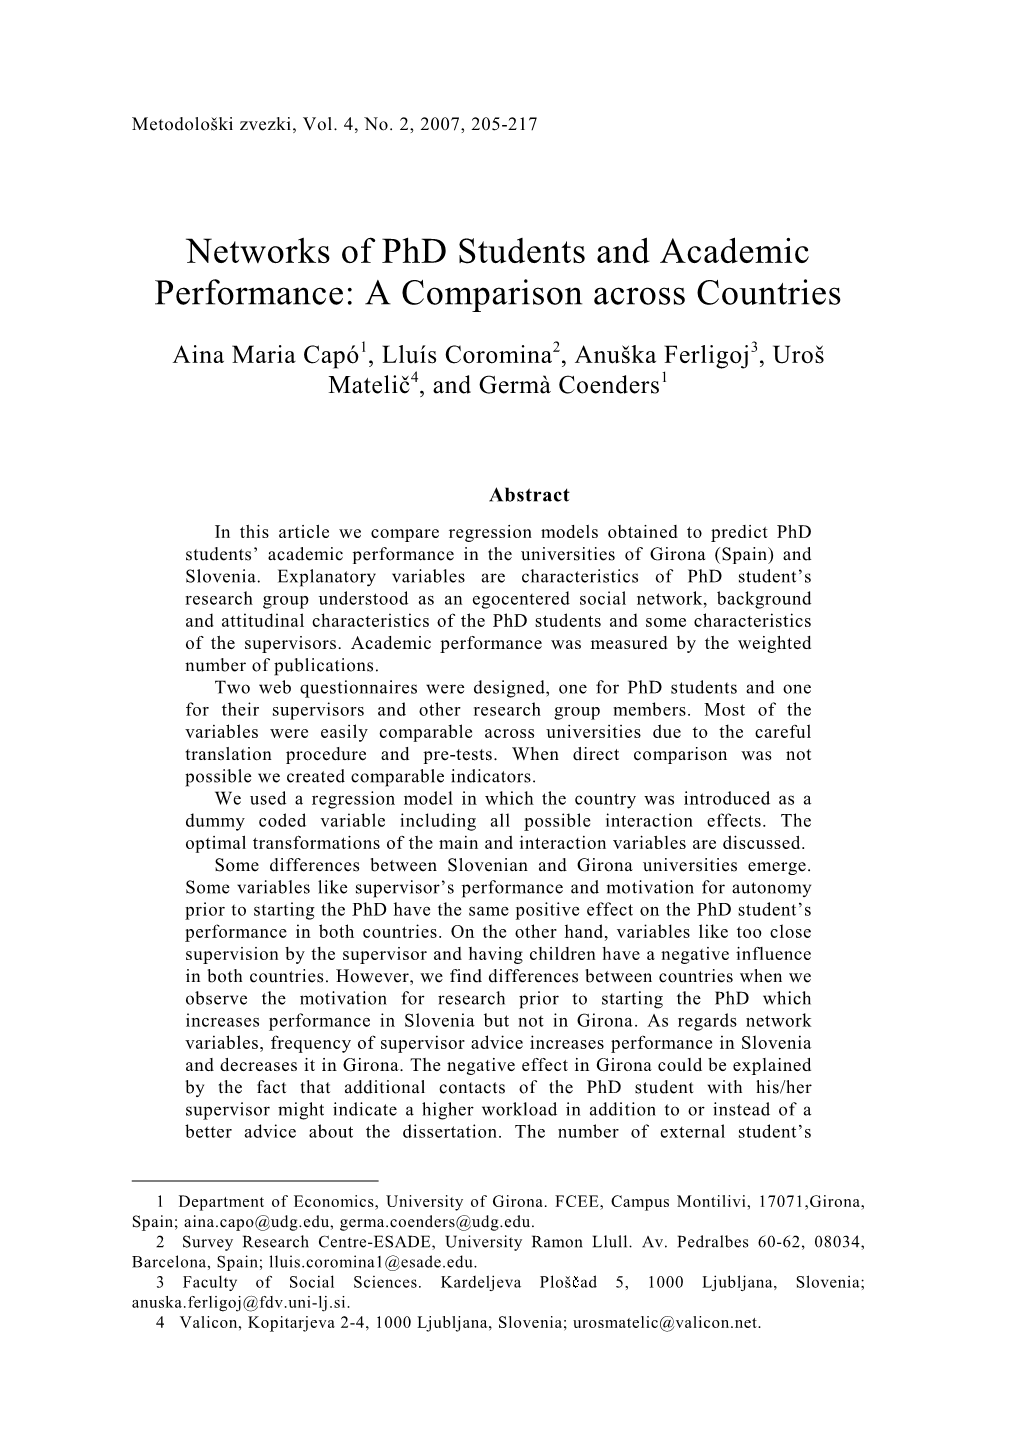 Networks of Phd Students and Academic Performance: a Comparison Across Countries